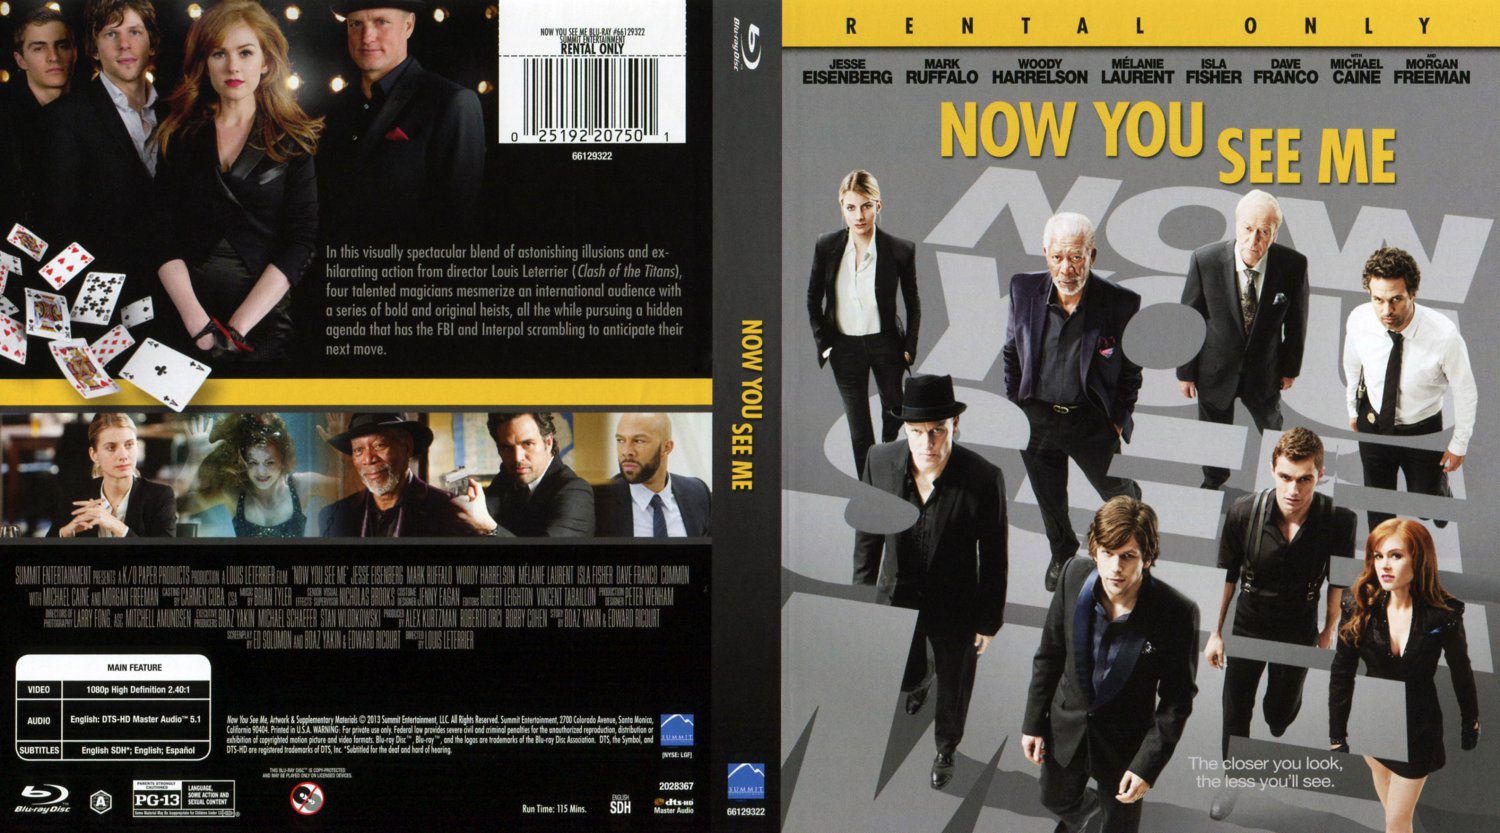 Now You See Me film - Wikipedia